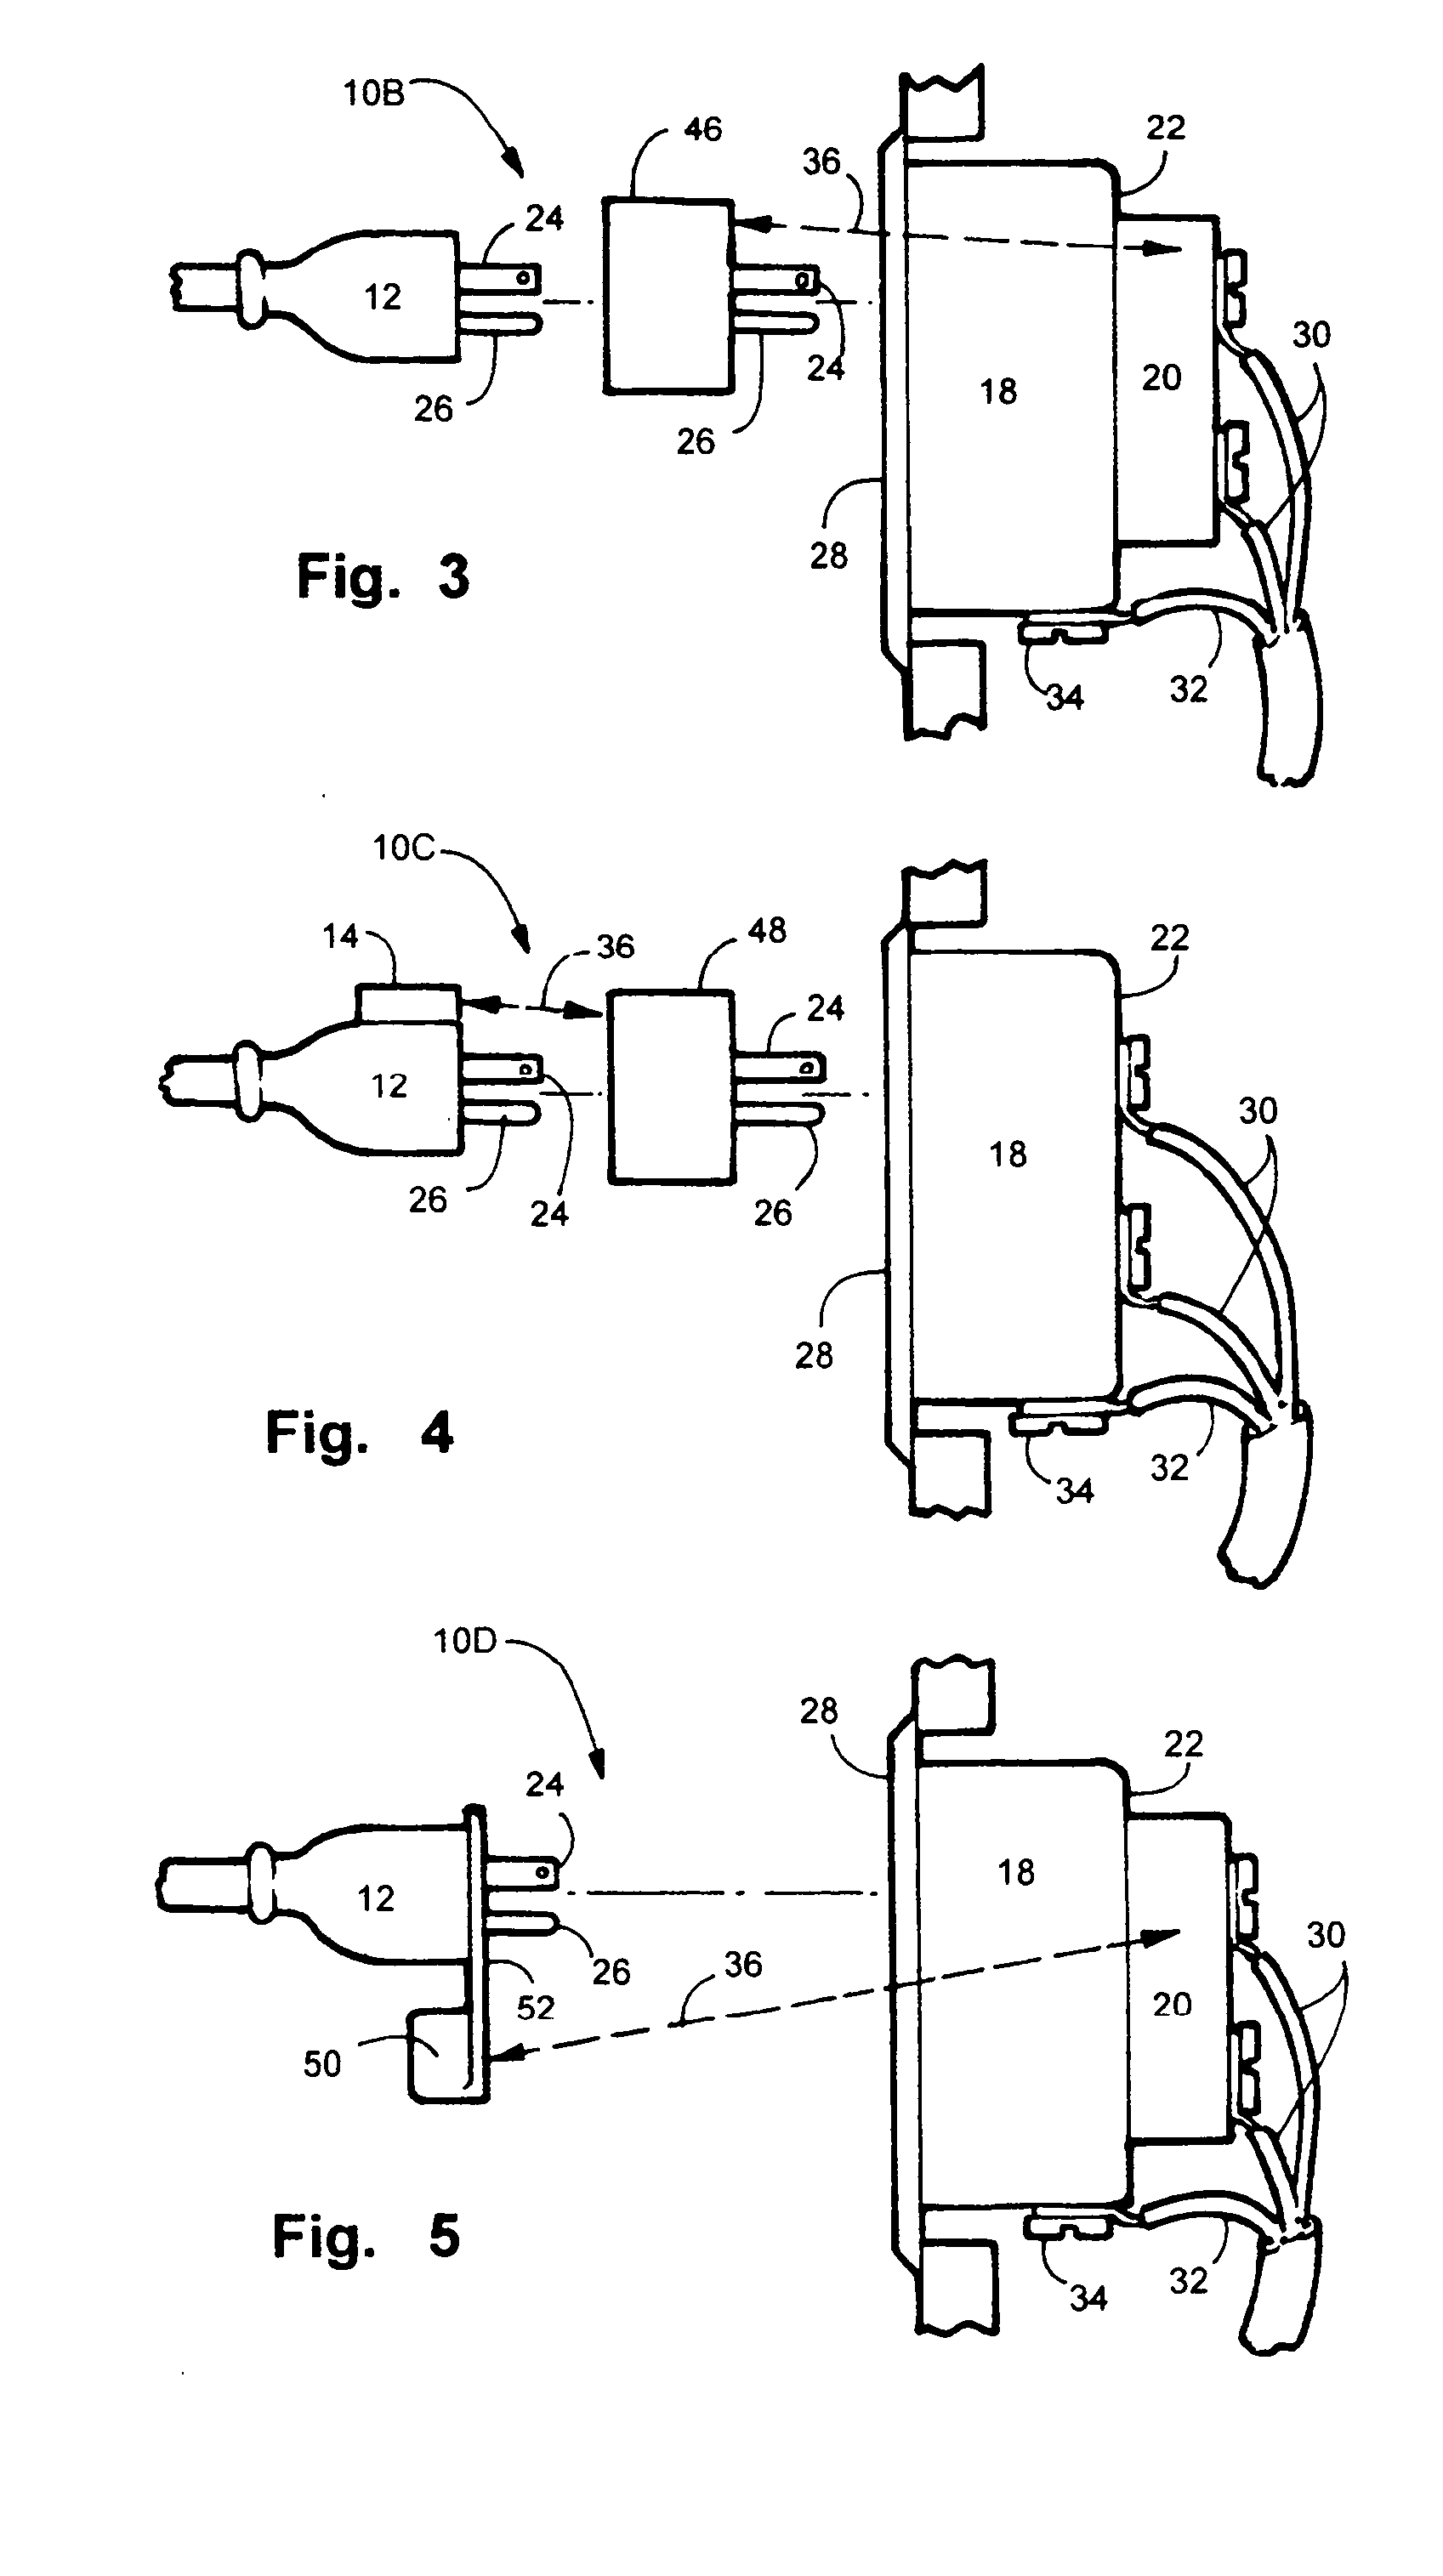 Electric, telephone or network access control system and method